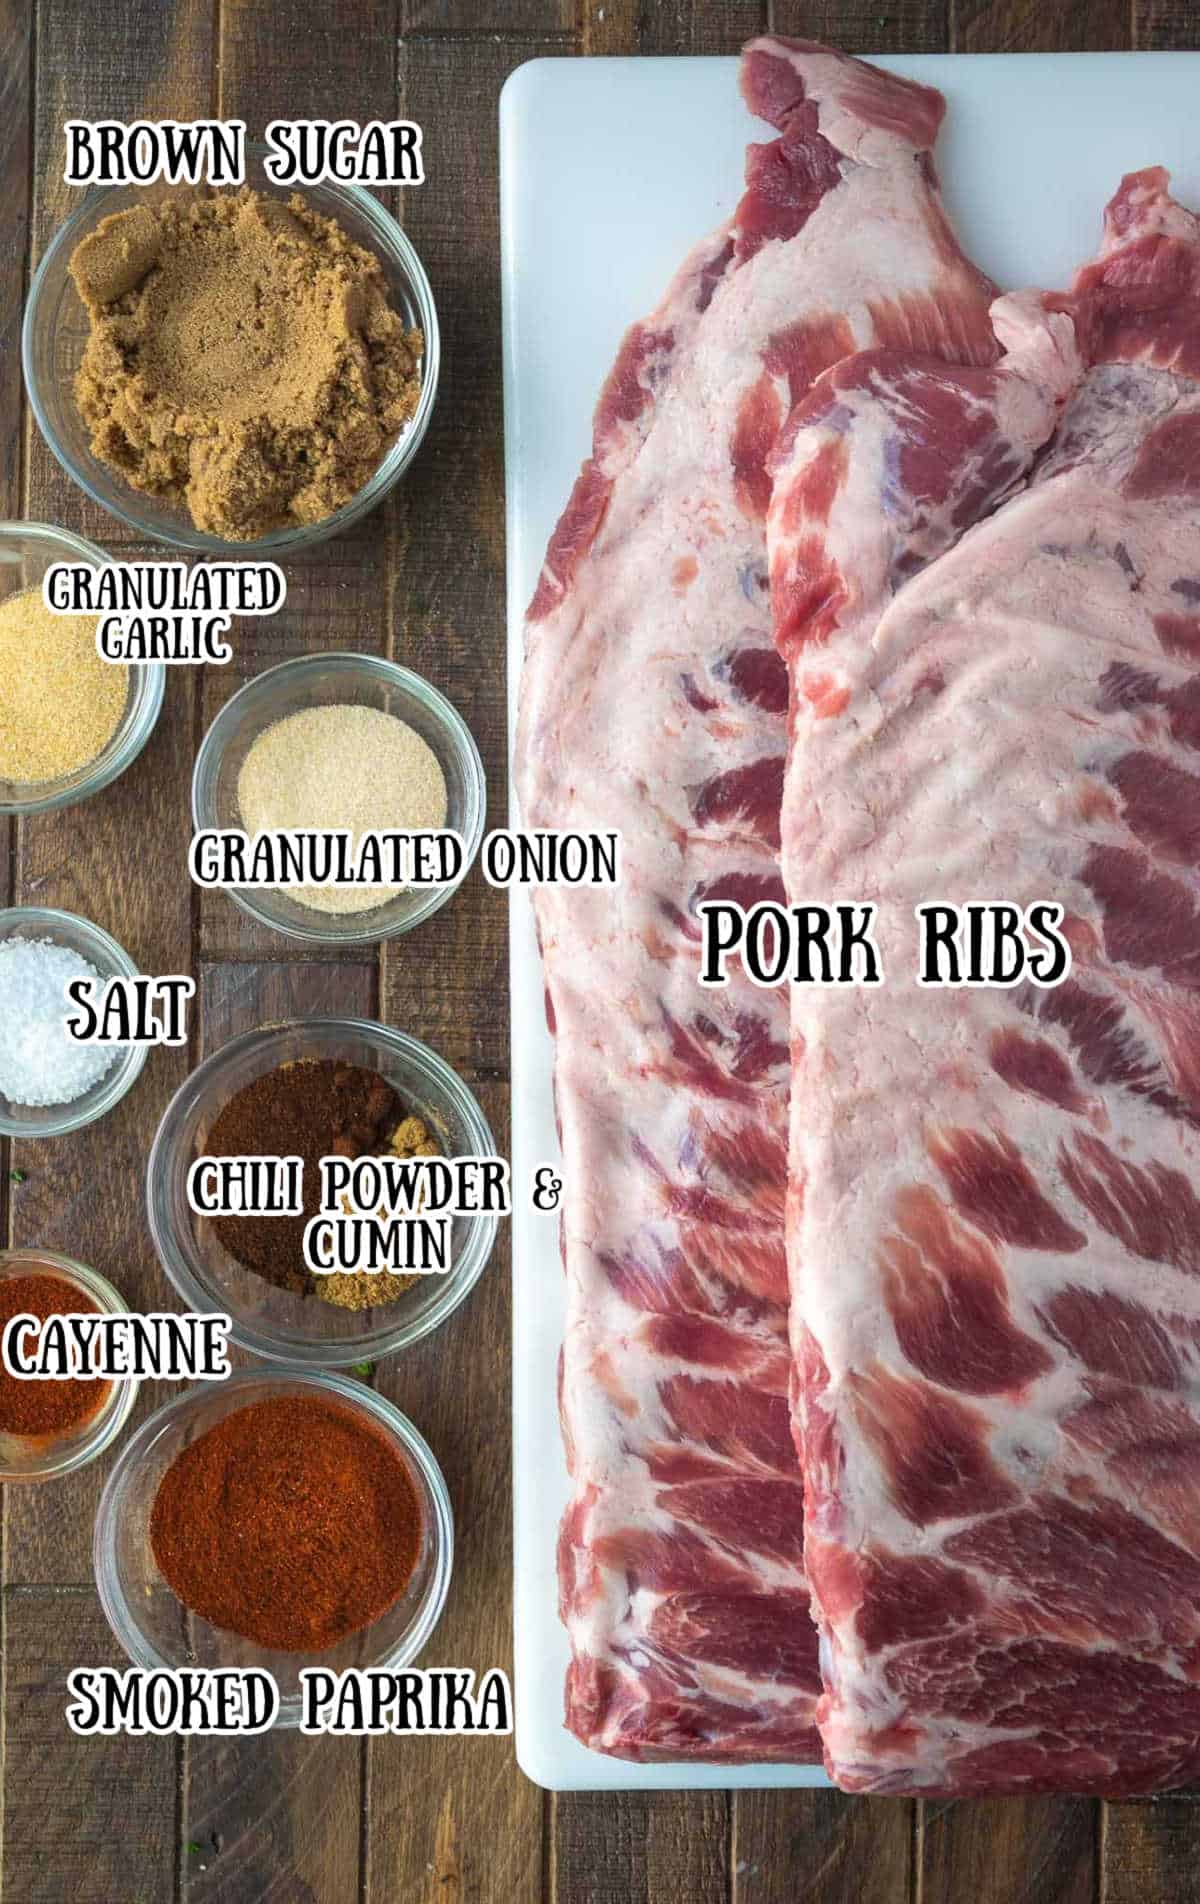 All the ingredients needed for these baked ribs.